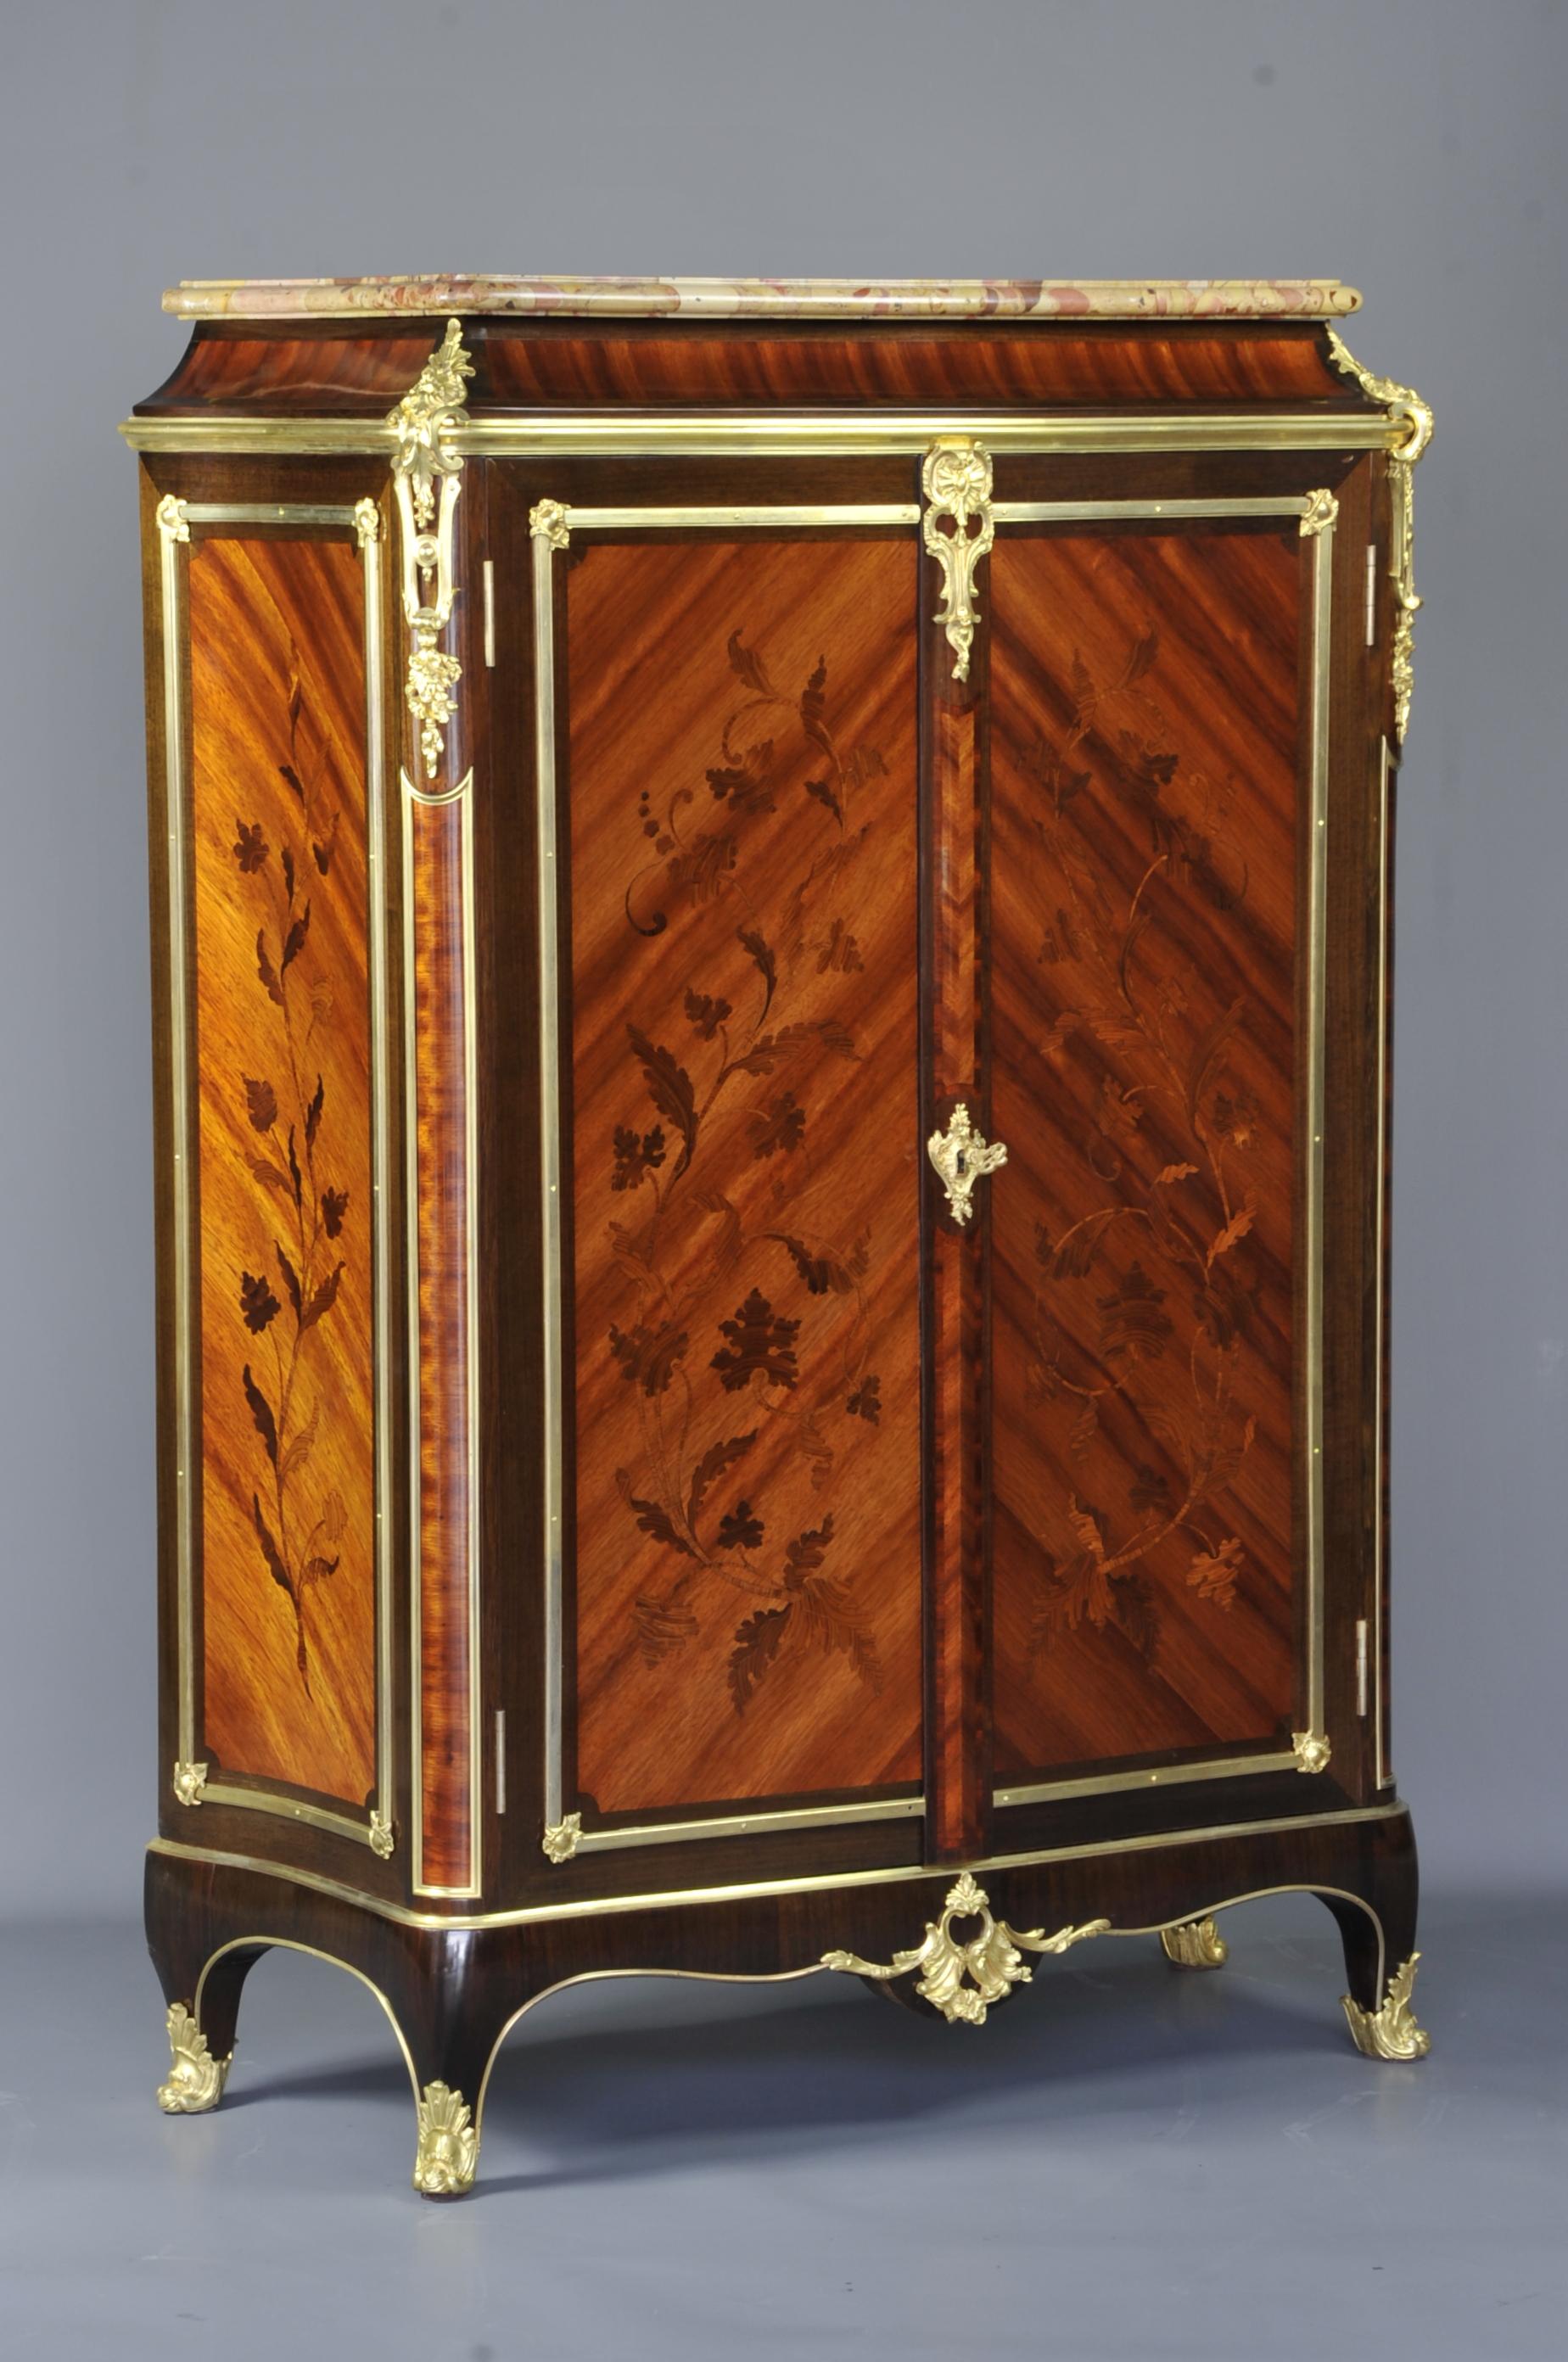 Superb meuble d'appui in tulip wood veneer and amaranth wood in reserve, presenting on the front and on each side beautiful foliage decorations in rosewood marquetry.
The sides are curved and the front, opening with two doors, slightly domed; on